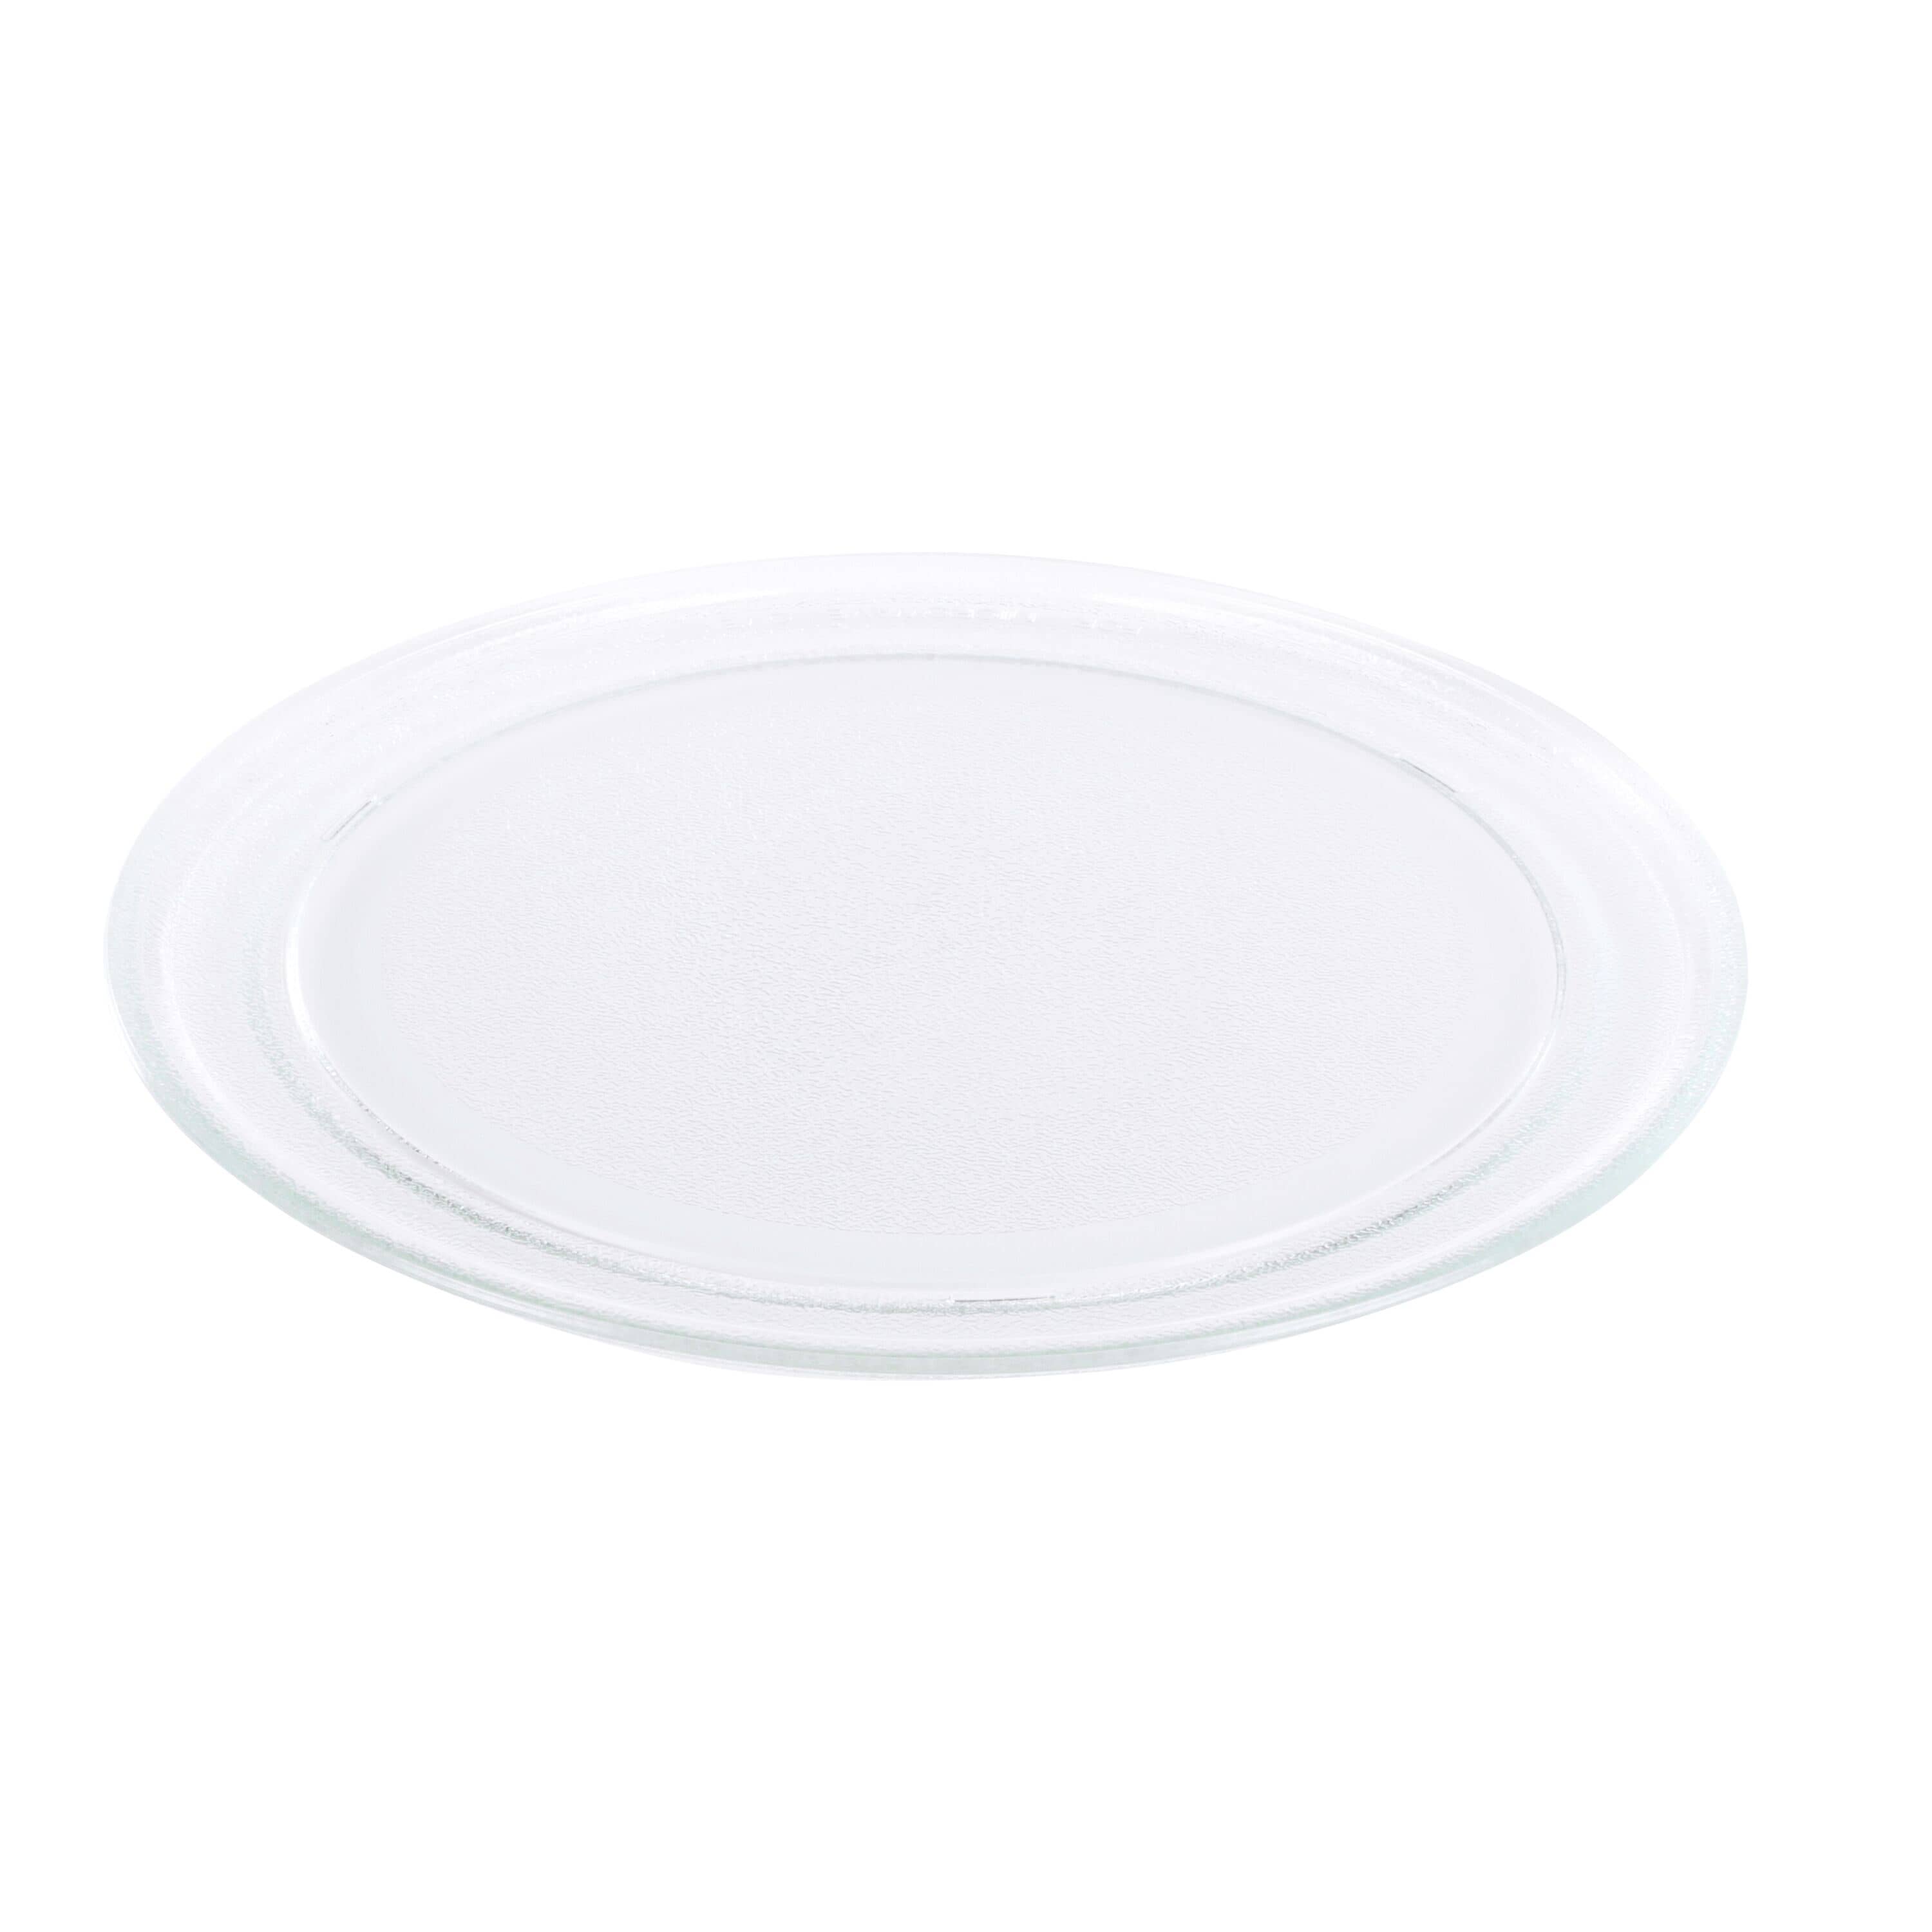 LG 3390W1A044B 12" Microwave Oven Glass Turntable Tray